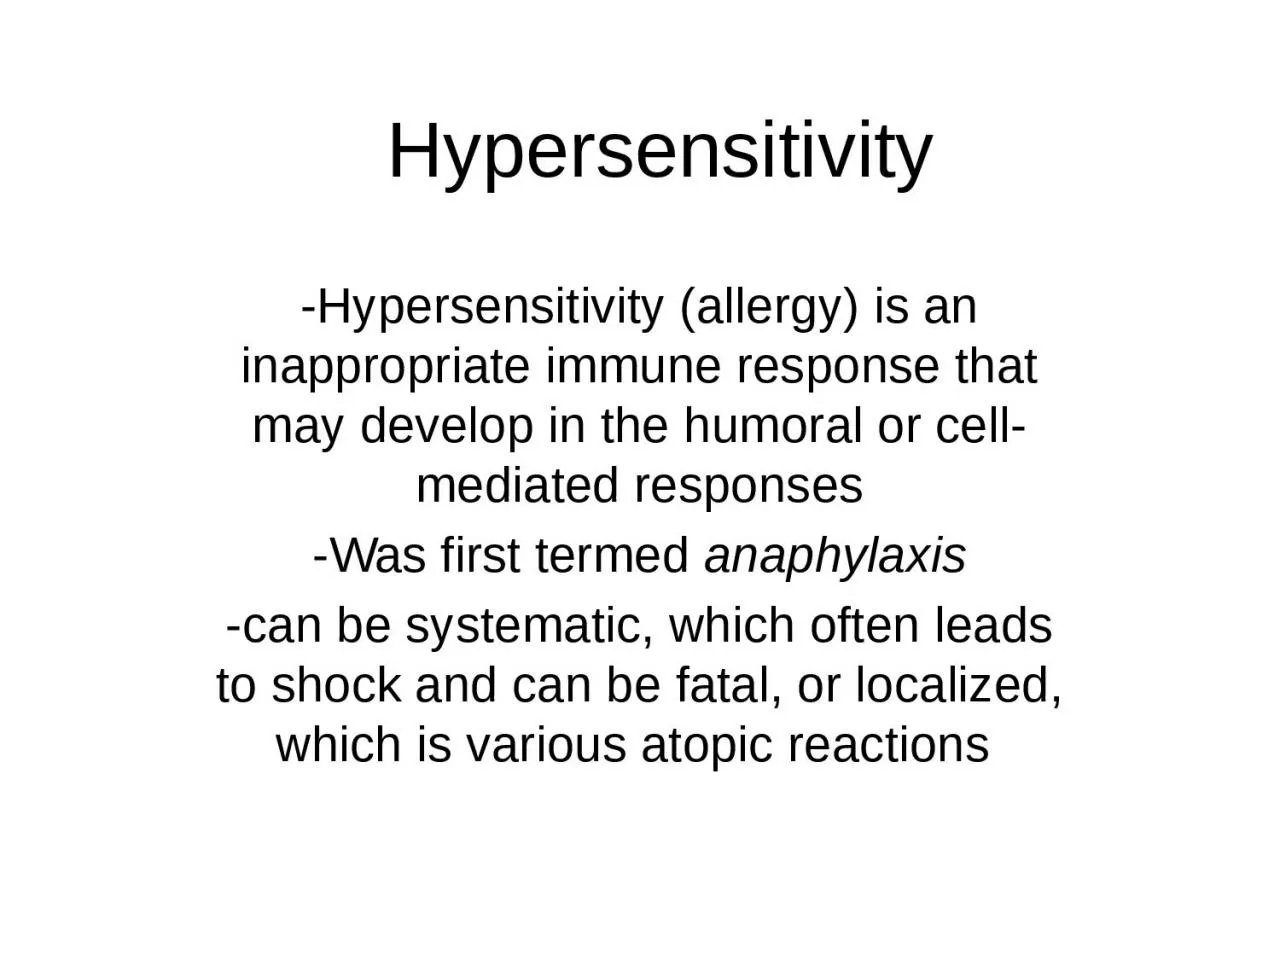 Hypersensitivity -Hypersensitivity (allergy) is an inappropriate immune response that